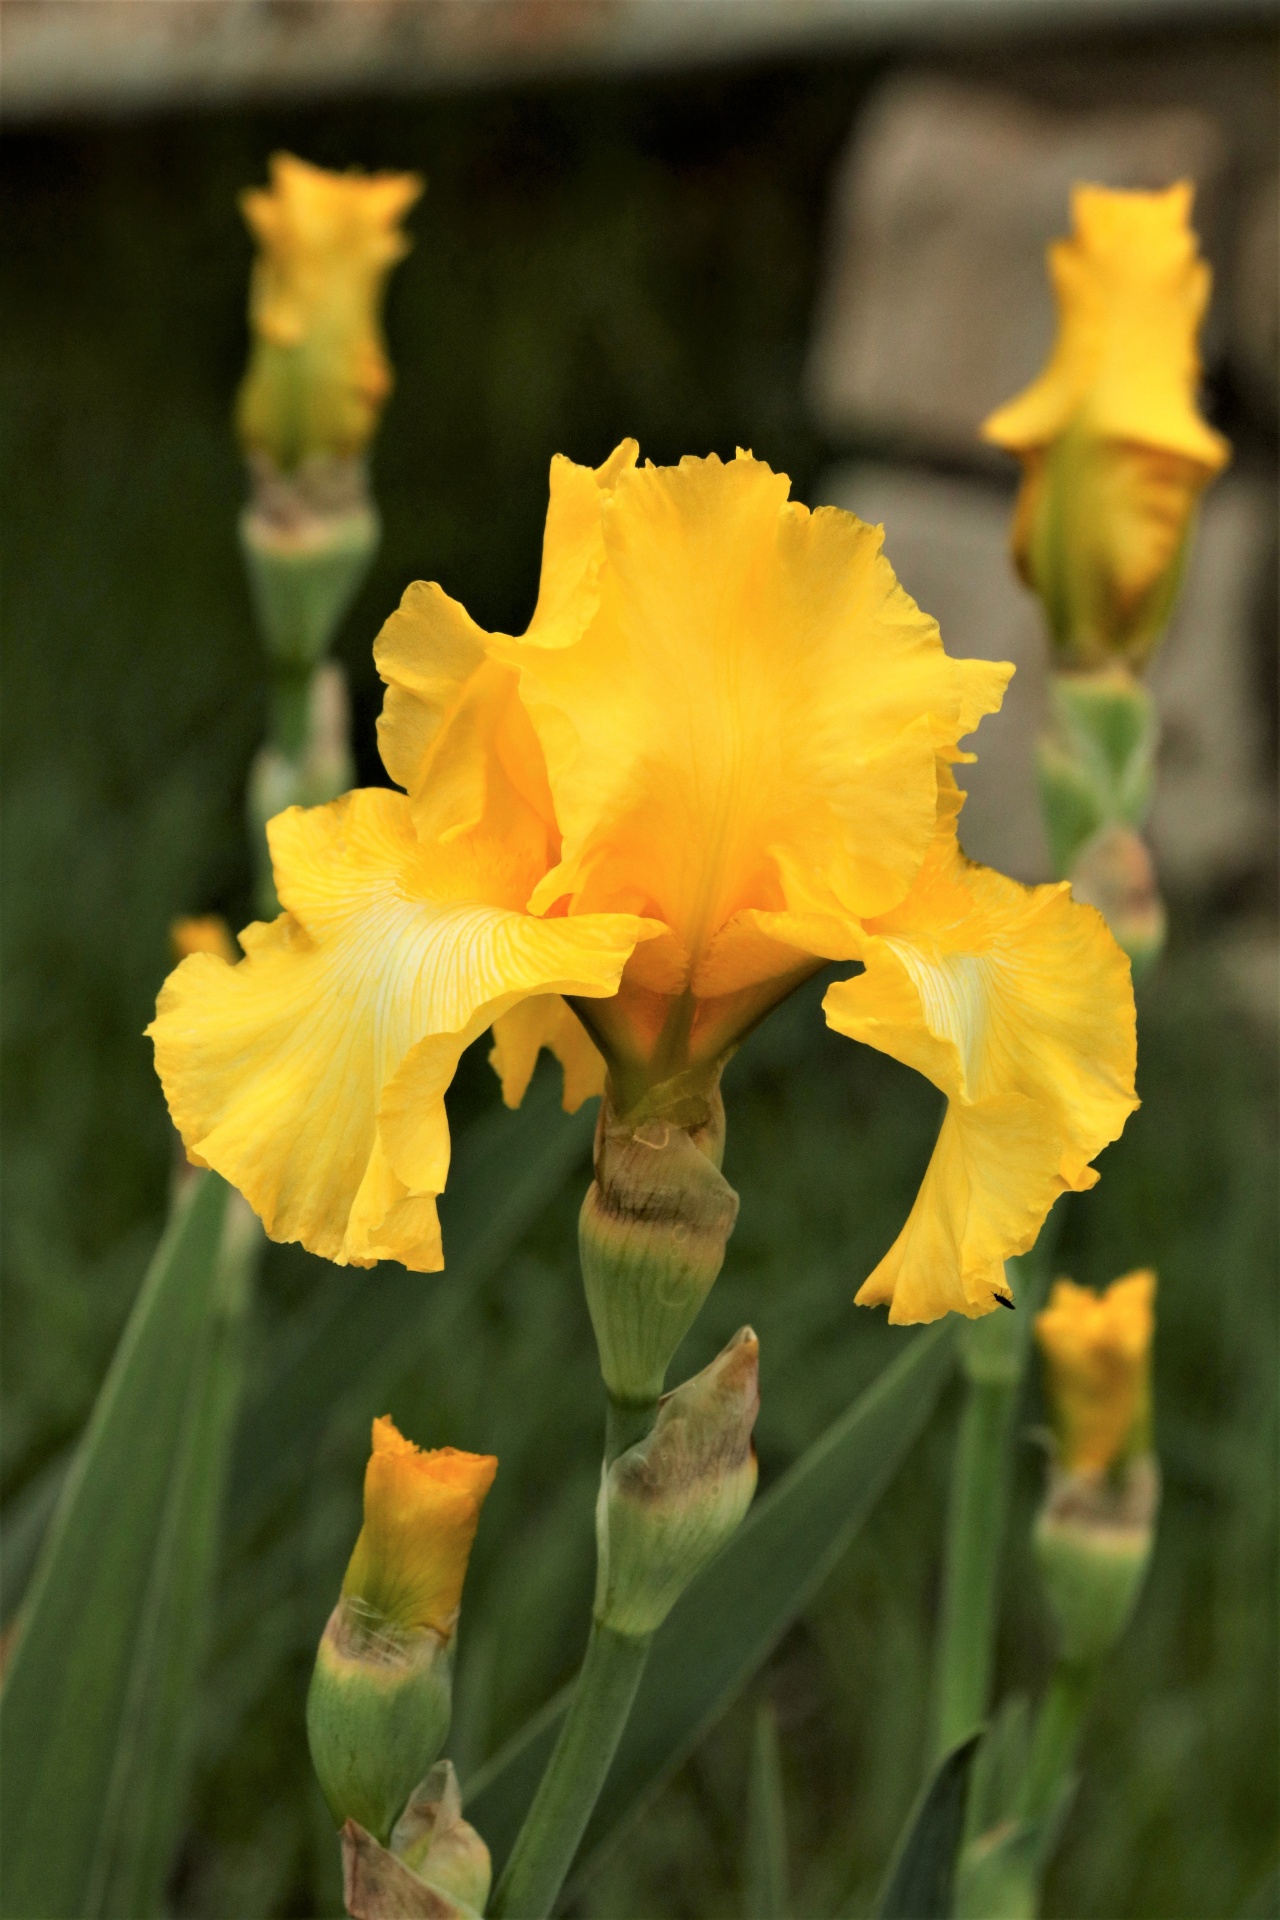 Close-up of a bright yellow bearded iris flower surrounded by little yellow buds and green sword-like leaves.